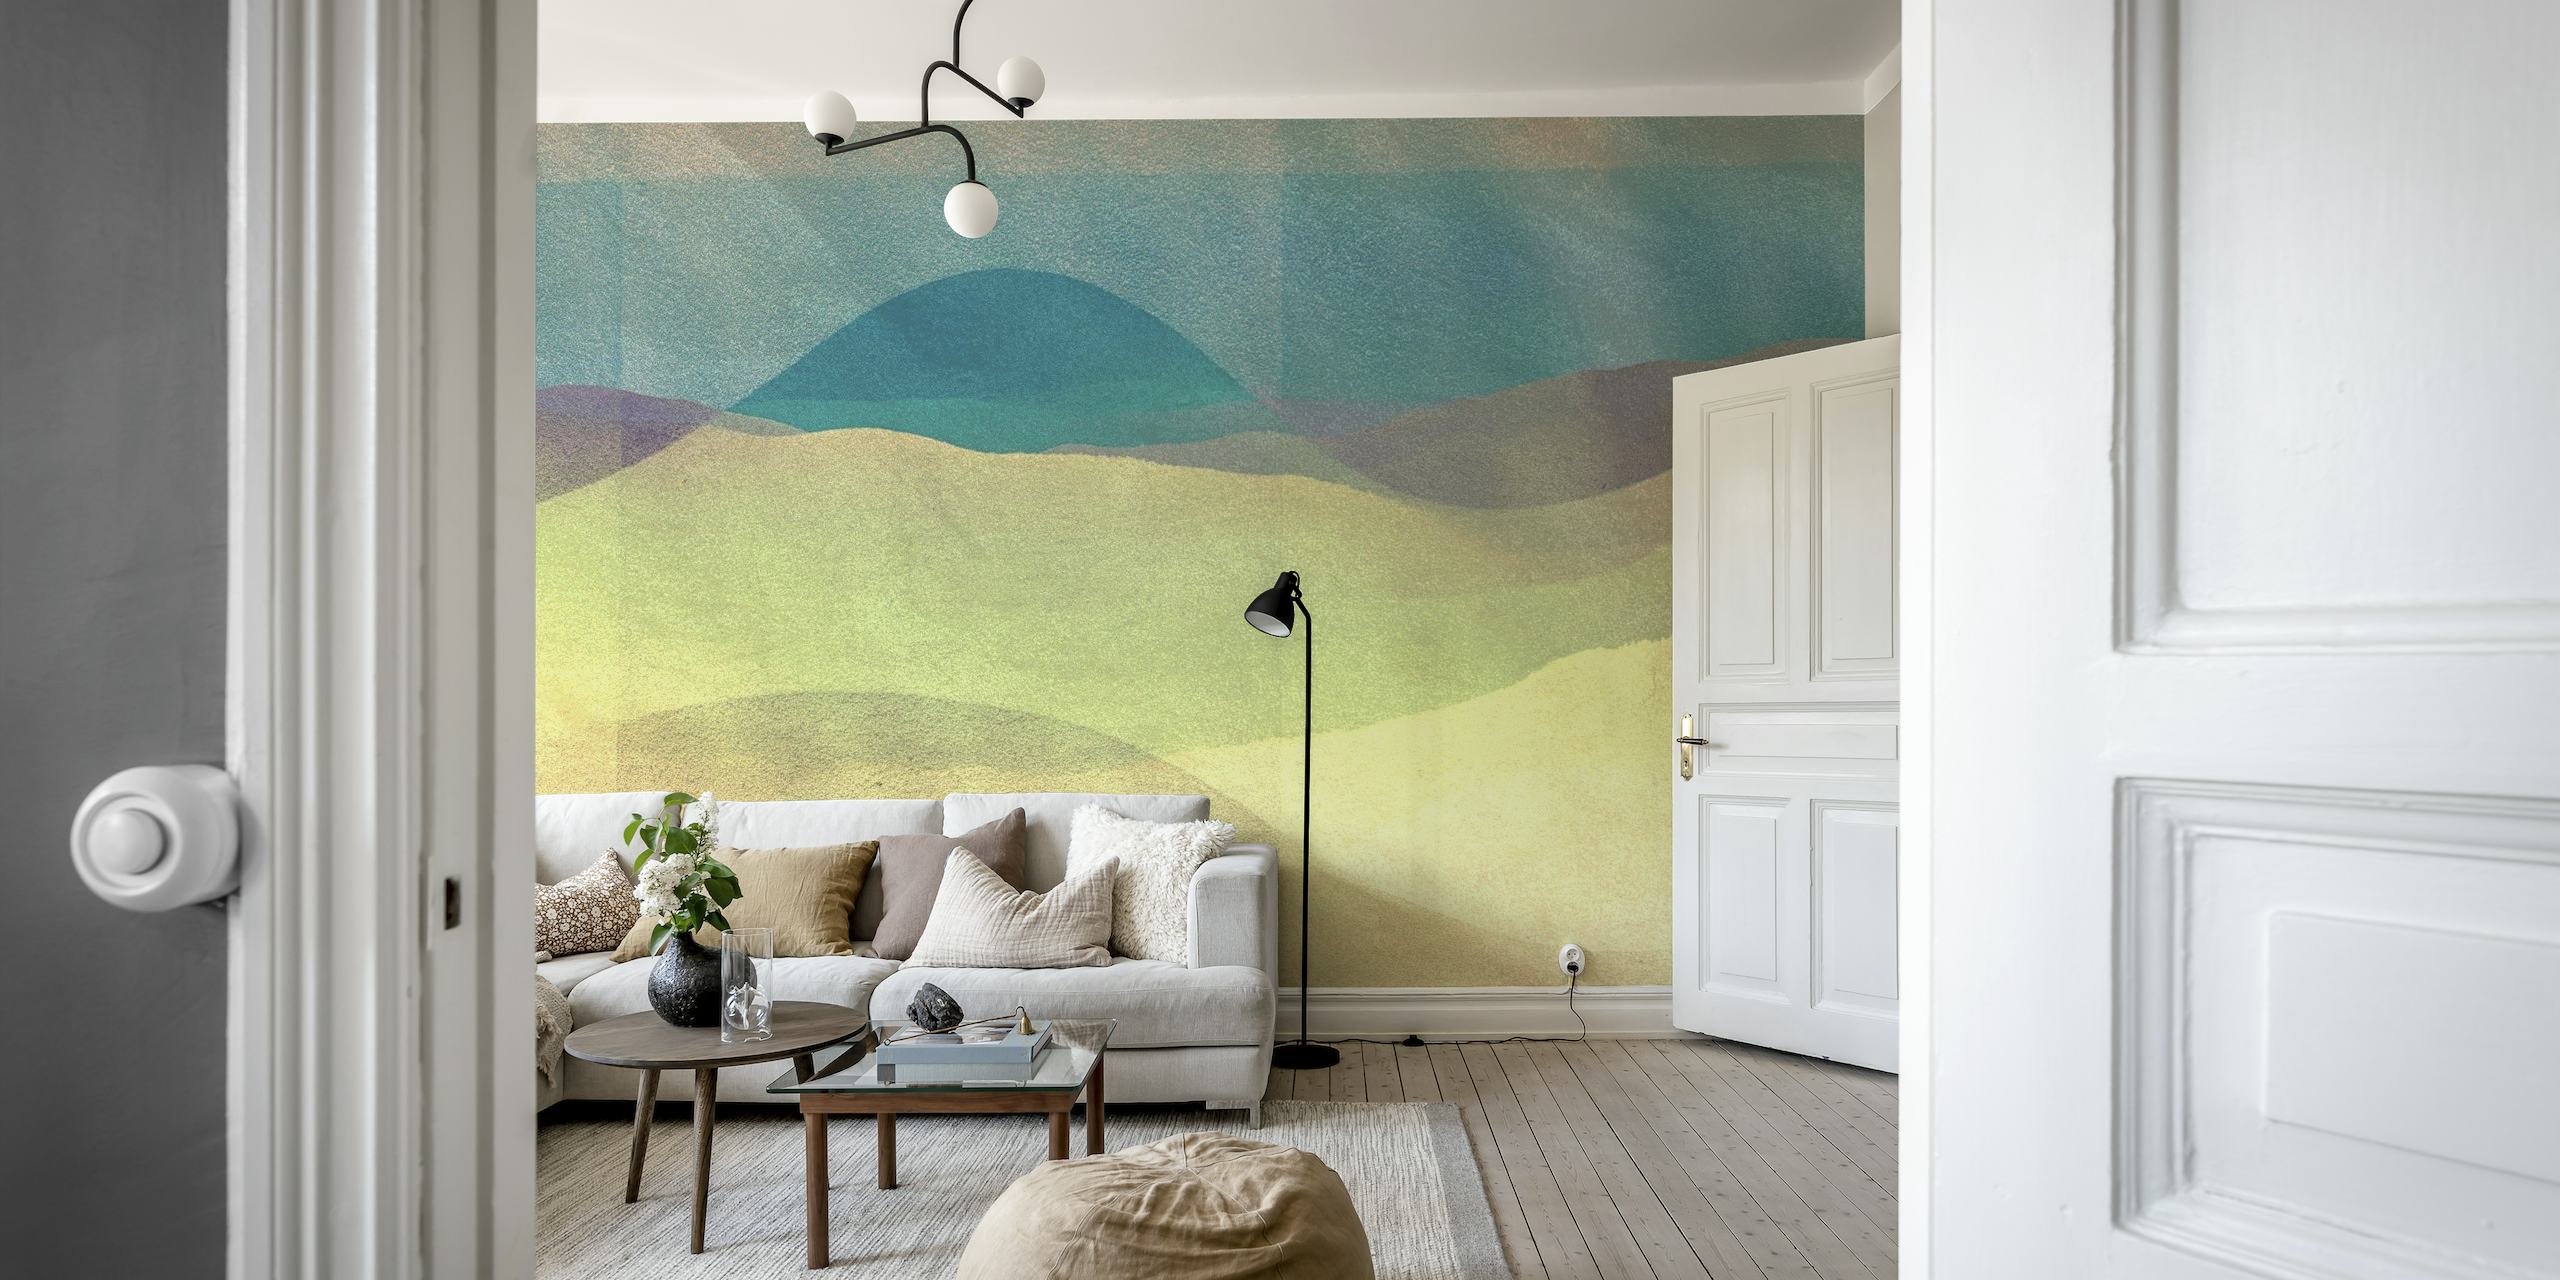 Abstract summer sun wall mural with teal, green, and tan hues in a serene landscape design.